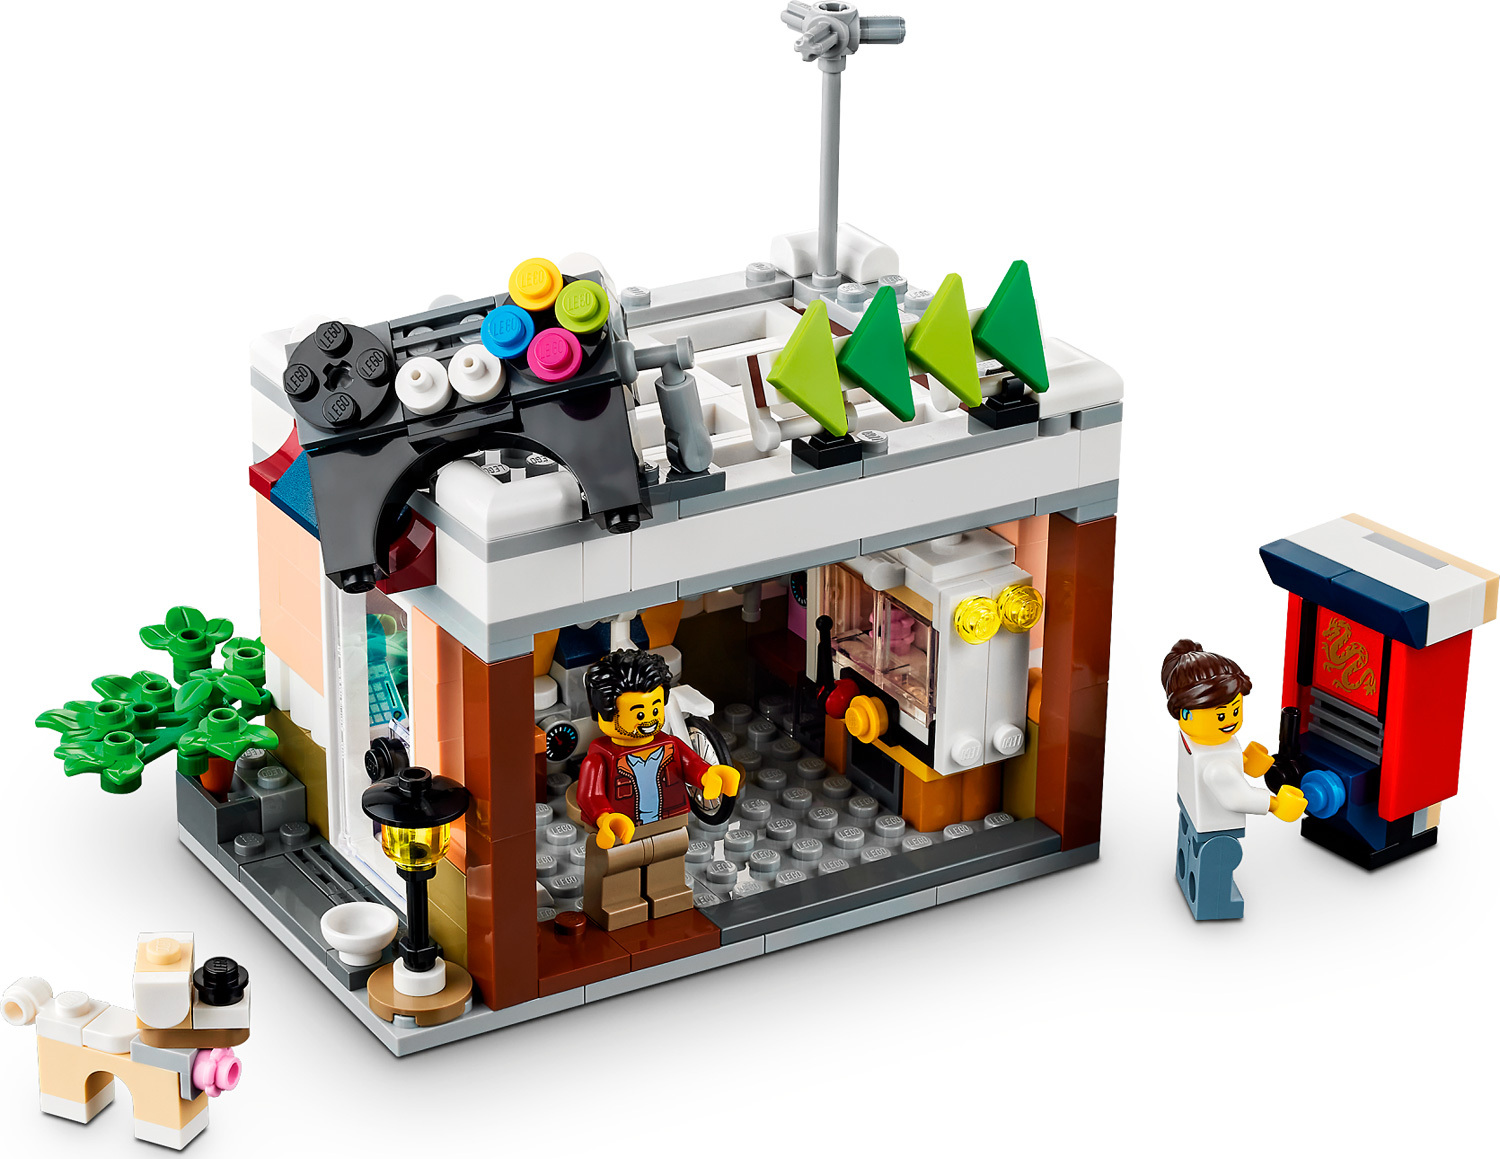 LEGO Creator 3 in 1 Downtown Noodle Shop House, Transforms from Noodle Shop  to Bike Shop to Arcade, Modular Building Set, Toy Gift for Kids 8 Years